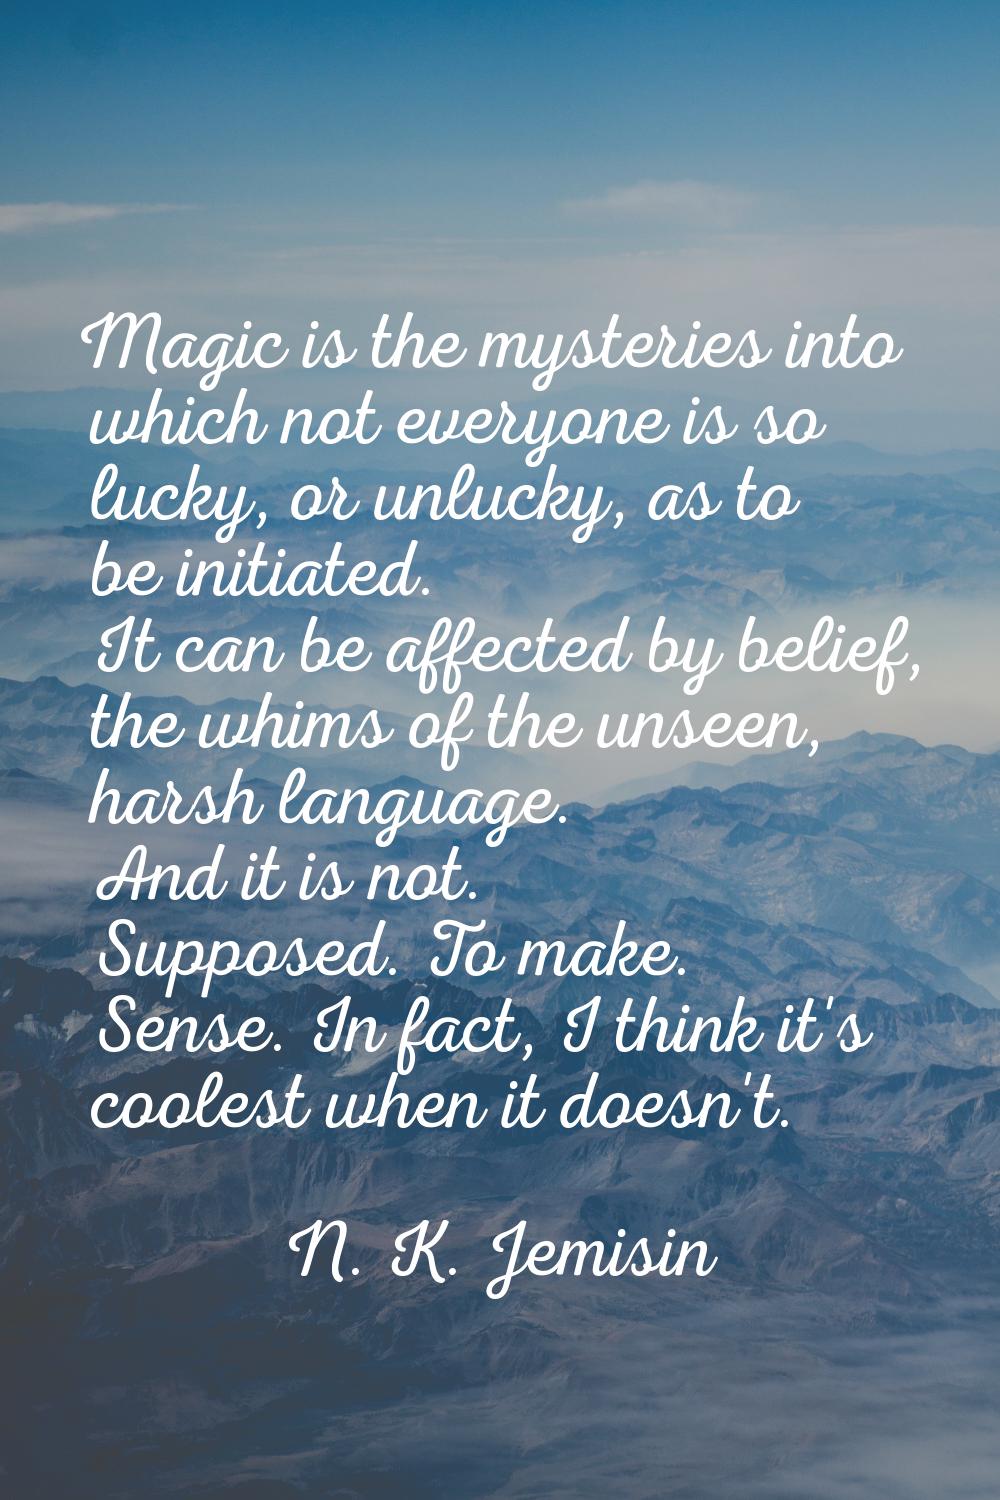 Magic is the mysteries into which not everyone is so lucky, or unlucky, as to be initiated. It can 